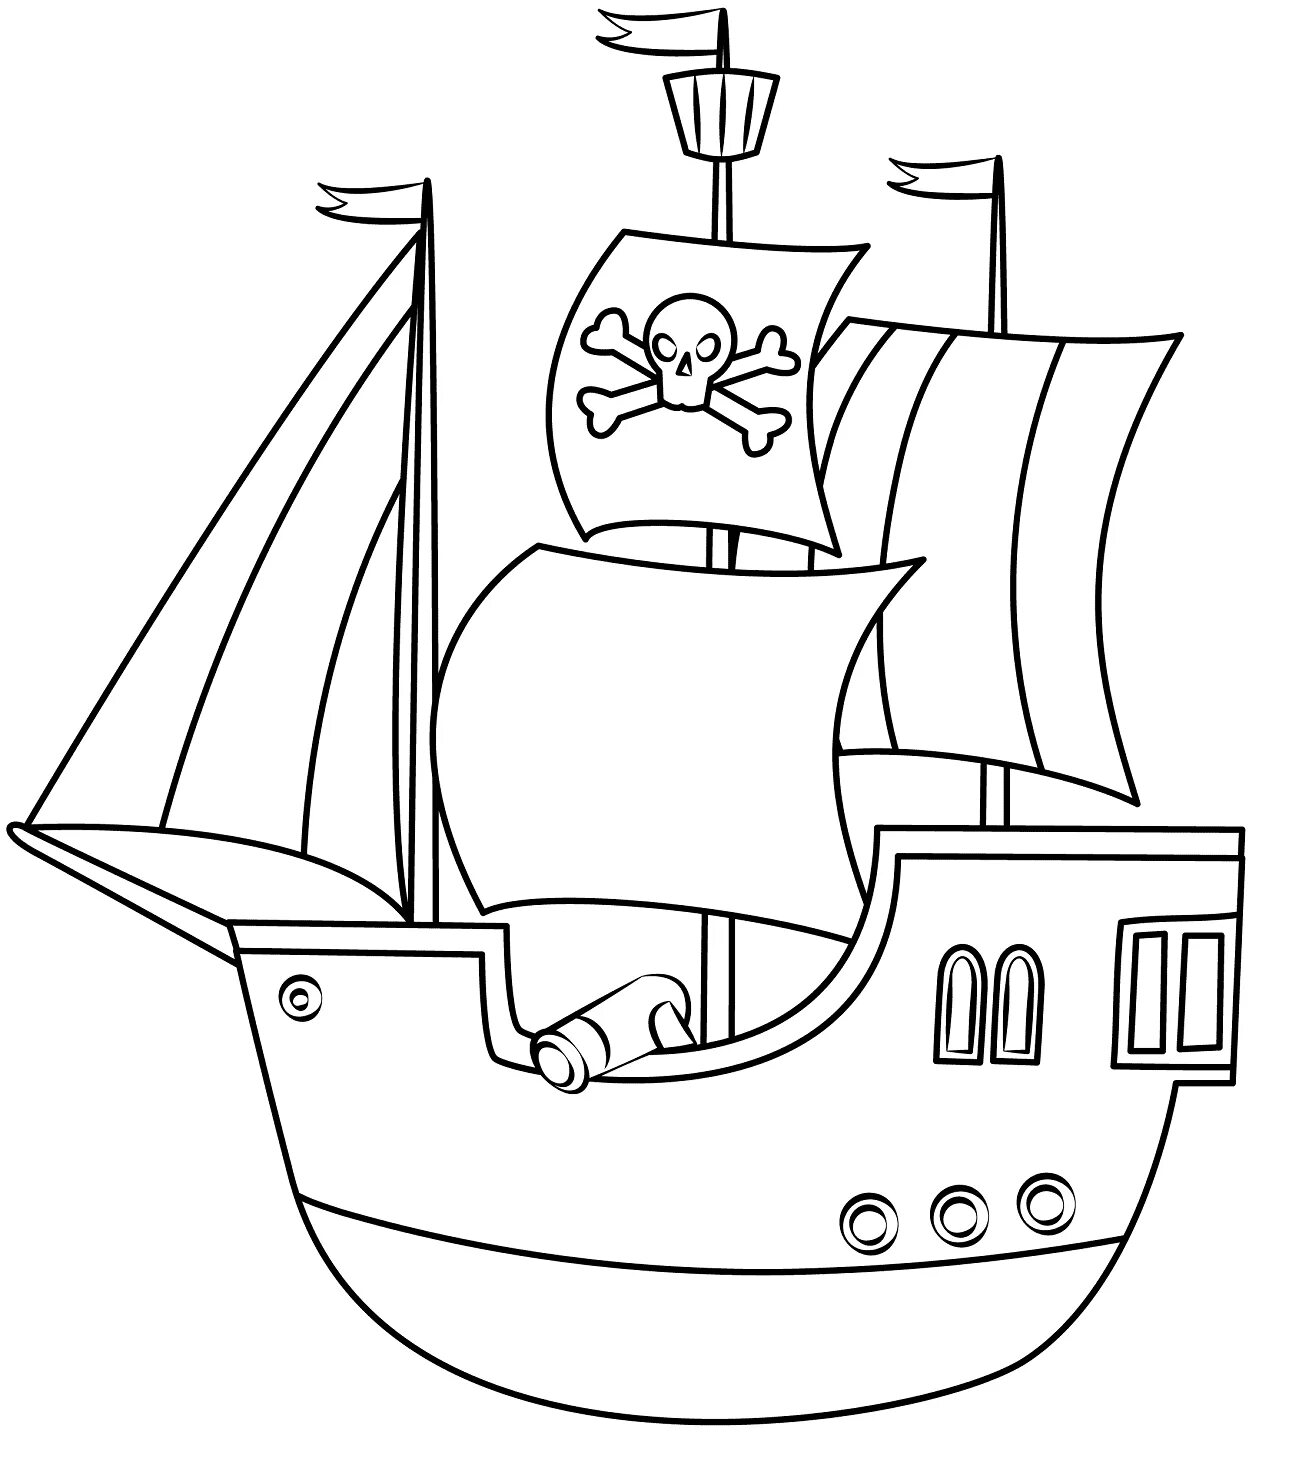 Impressive pirate ship coloring page for kids